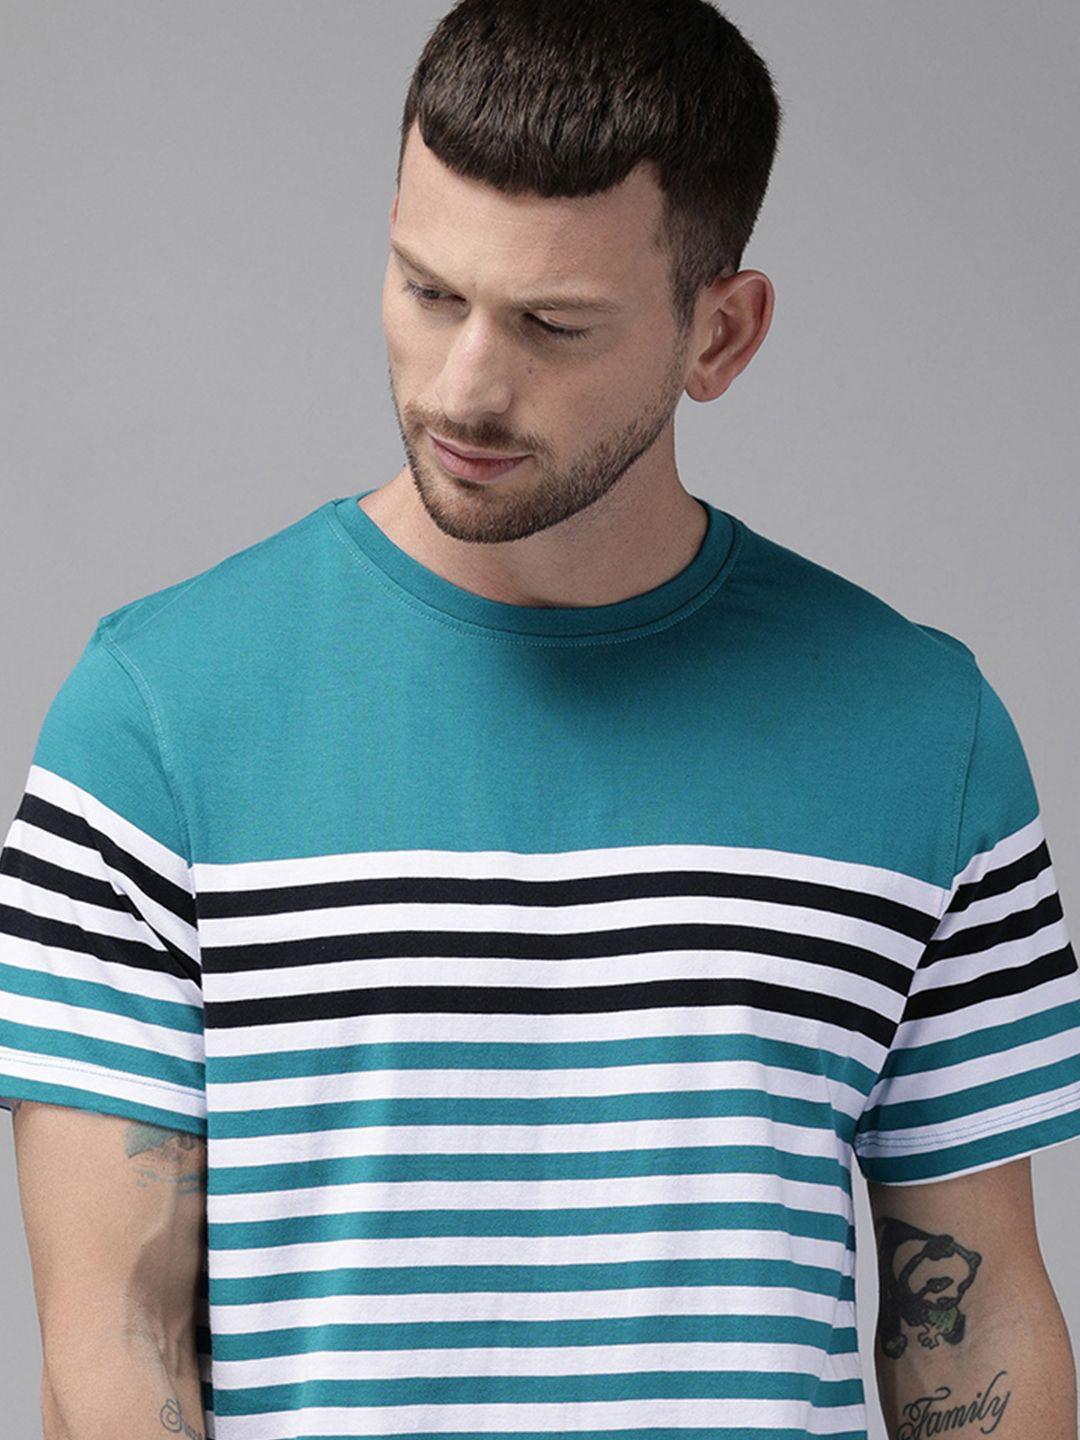 the roadster lifestyle co men teal blue  white striped round neck pure cotton t-shirt